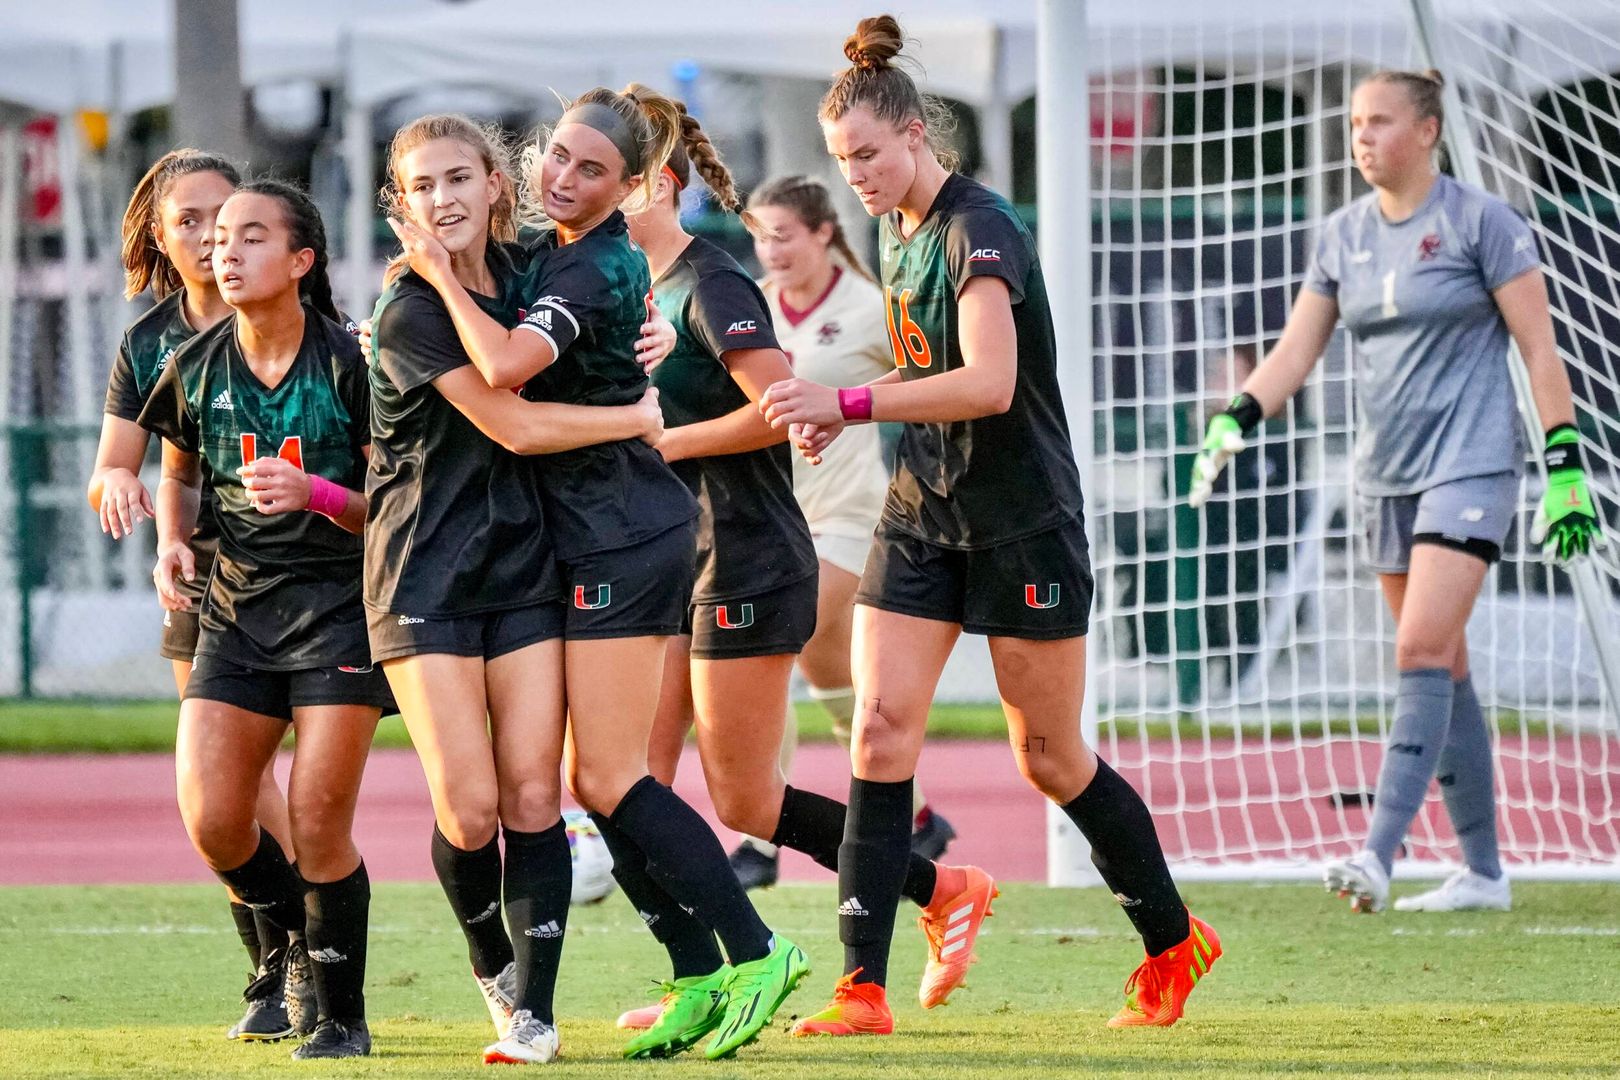 Hurricanes Fly Past Eagles, 1-0